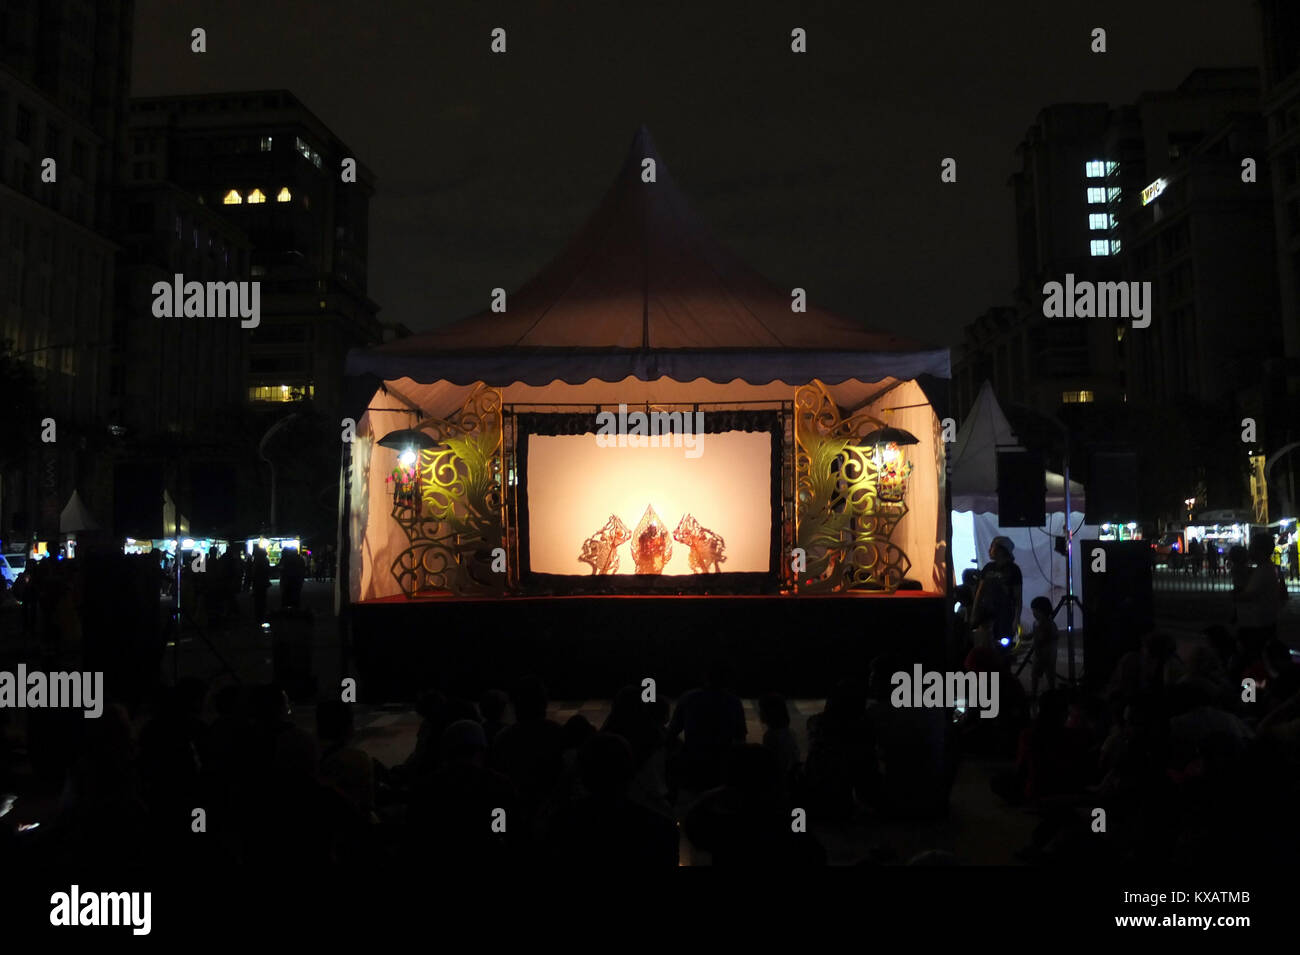 KUALA LUMPUR, MALAYSIA - DECEMBER 28: People watch shadow of puppets show during the Putrajaya Lighting Festival on December 28, 2017 in Putrajaya, Malaysia. The four-night festival featured a light art communities and university students in Malaysia showcasing their creativity of light-themed events, including Luminous lighting effect show, decorative arch and light structure exhibits, car light show, night fun ride, wayang kulit performance (shadow puppetry), and a light garden . Credit: Samsul Said/AFLO/Alamy Live News Stock Photo